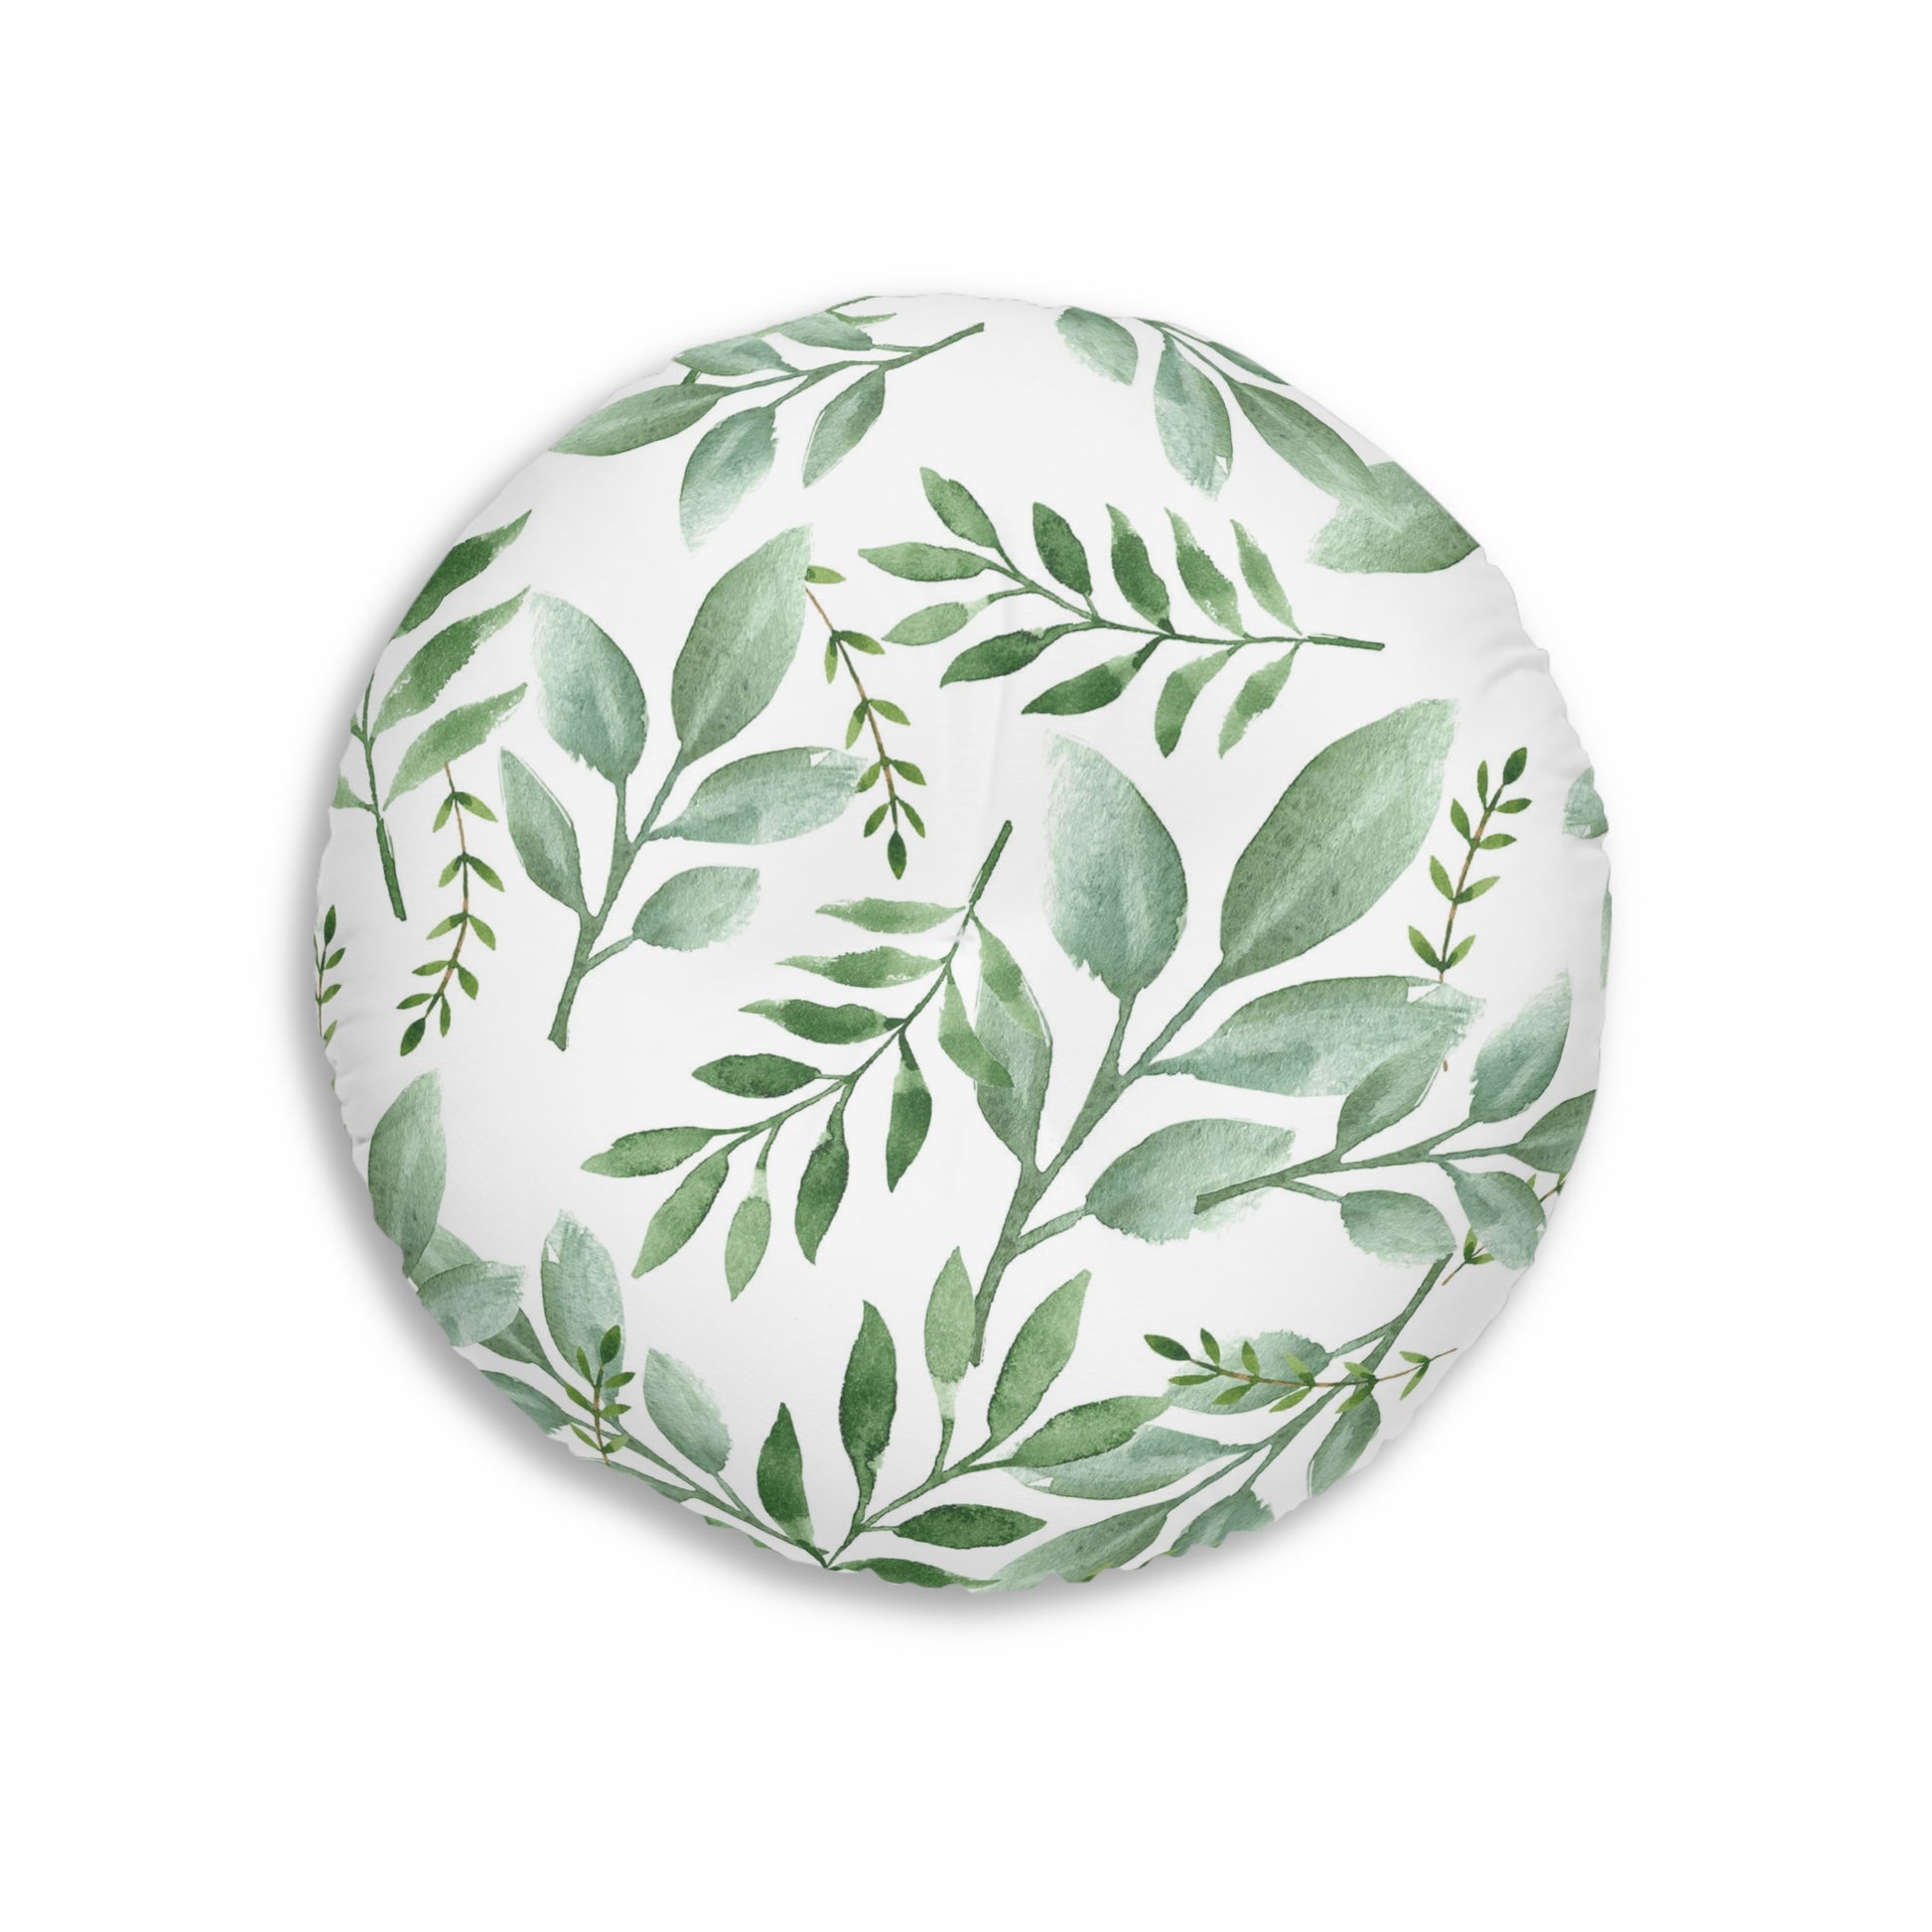 A Printify round tufted floor-pillow with a pattern of green botanical design leaves and branches, made in America.